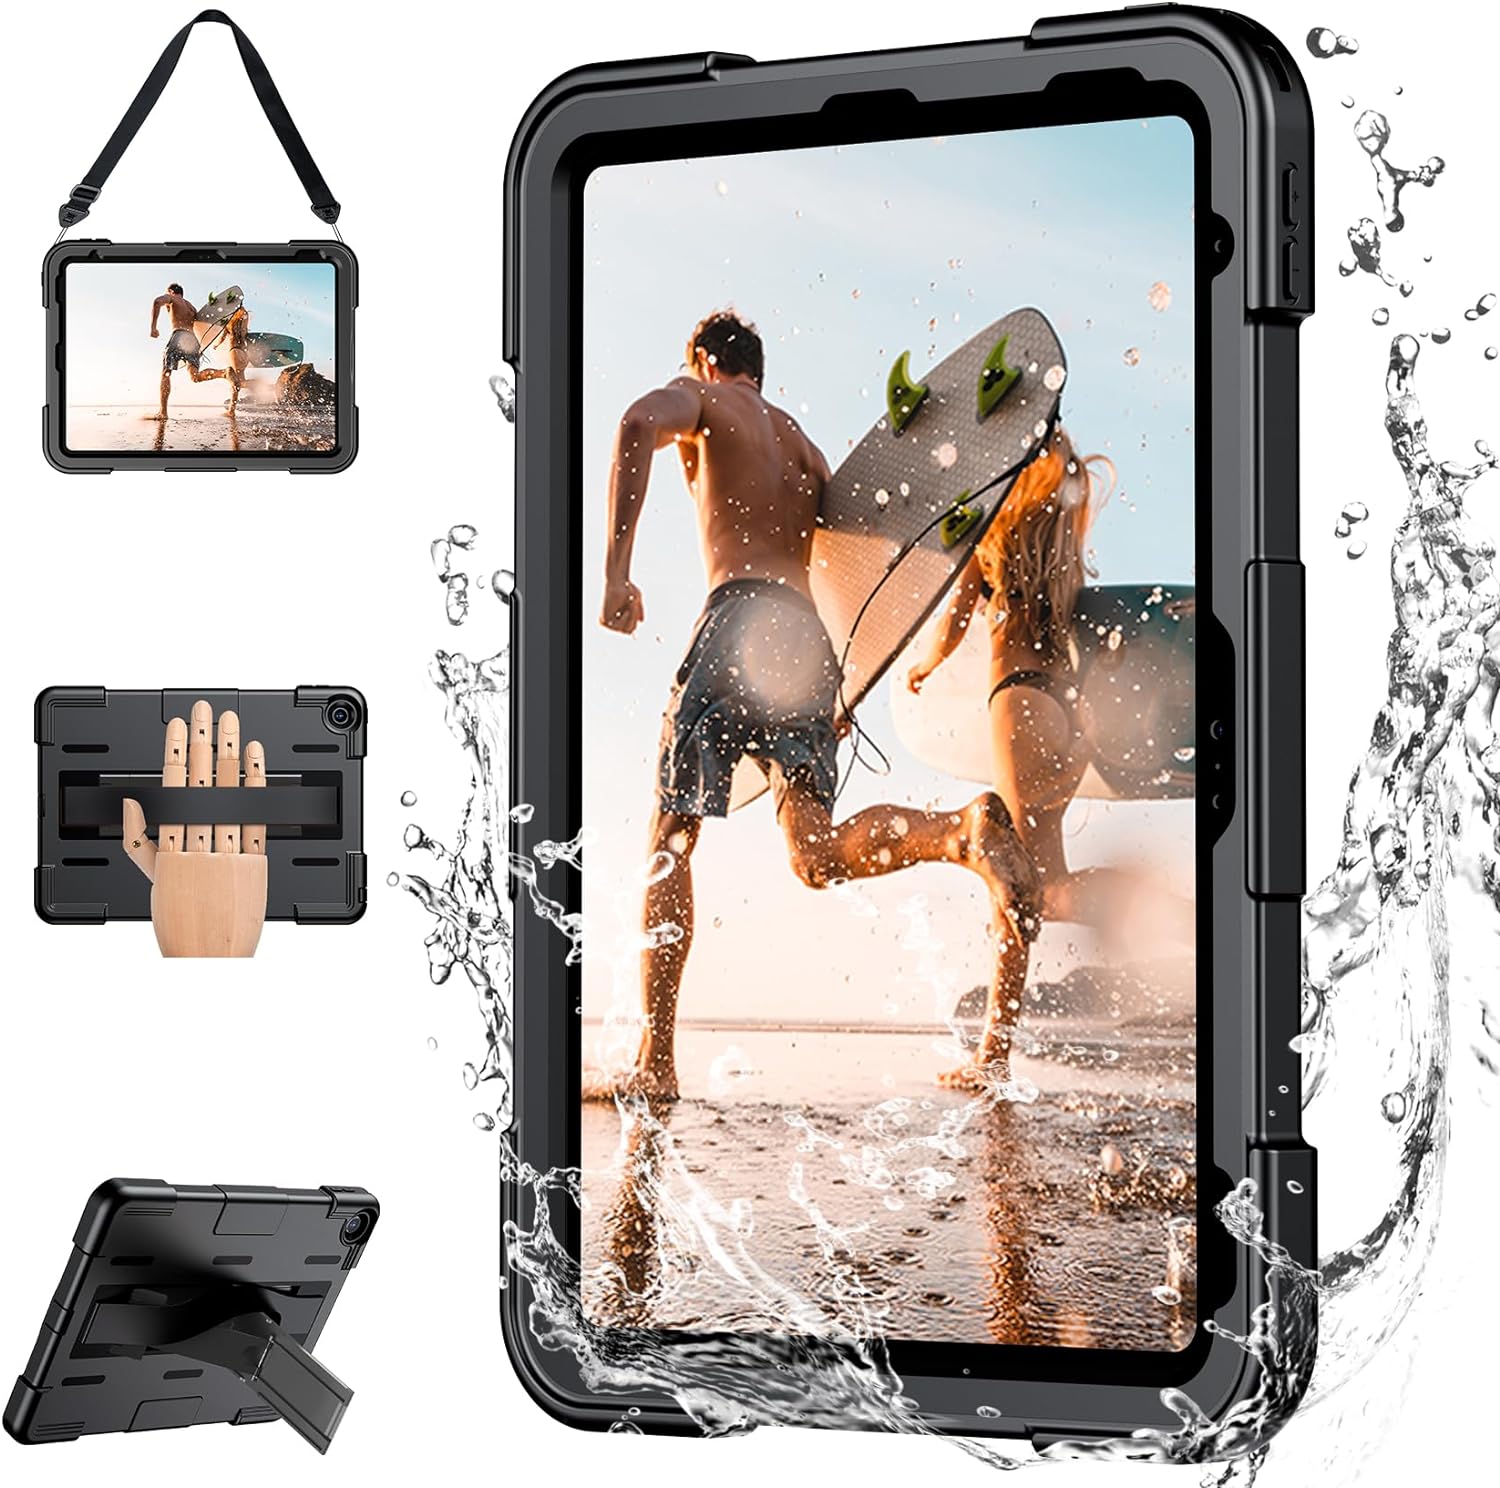   for iPad 10th Generation 10.9 Inch Case,[Military Grade Dropproof][IP68 Waterproof] with Screen Protector&Stand&Hand Strap,Full Body Shockproof for iPad 10th Gen 2022 Released